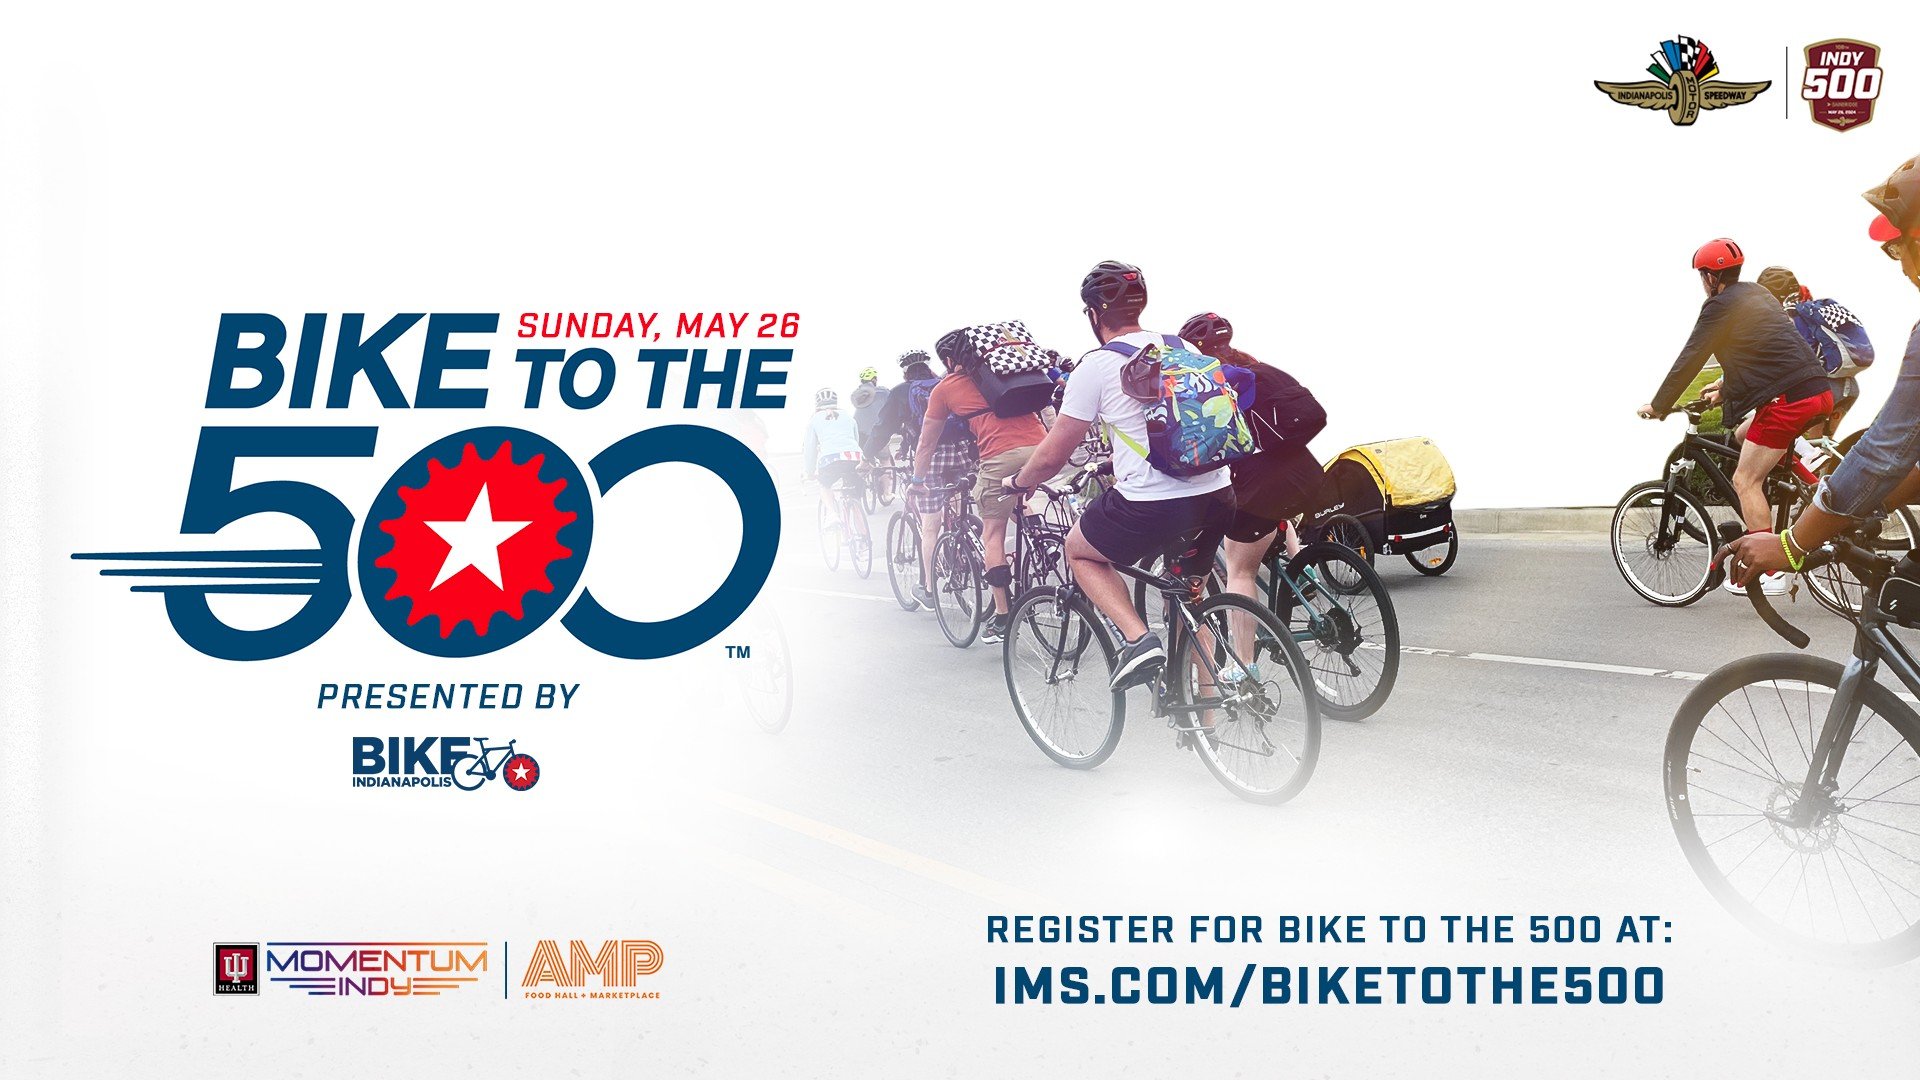 Thinking about the Indianapolis 500?  Don't sit in traffic when you can pedal past the crowds on an escorted route and park at the Indianapolis Motor Speedway.  Join BIke Indianapolis at the AMP at 16 Tech on Sunday, May 26th and Bike to the 500!

Se